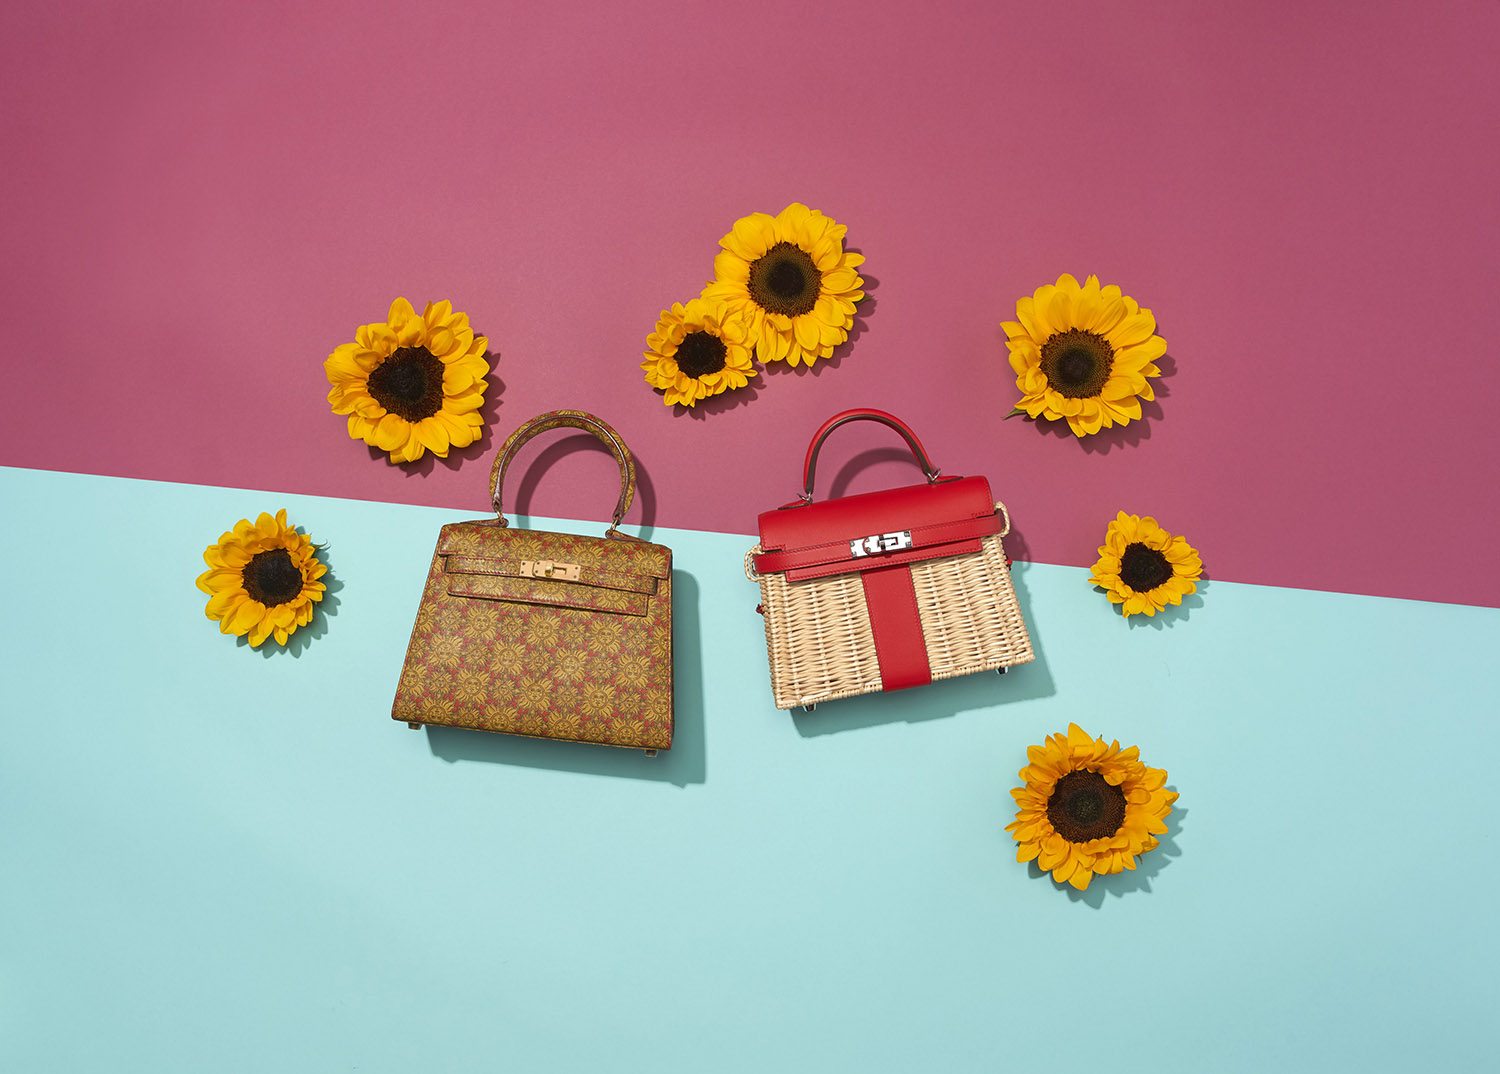 A Christie's Expert on Collecting Hermès Handbags - Christie's